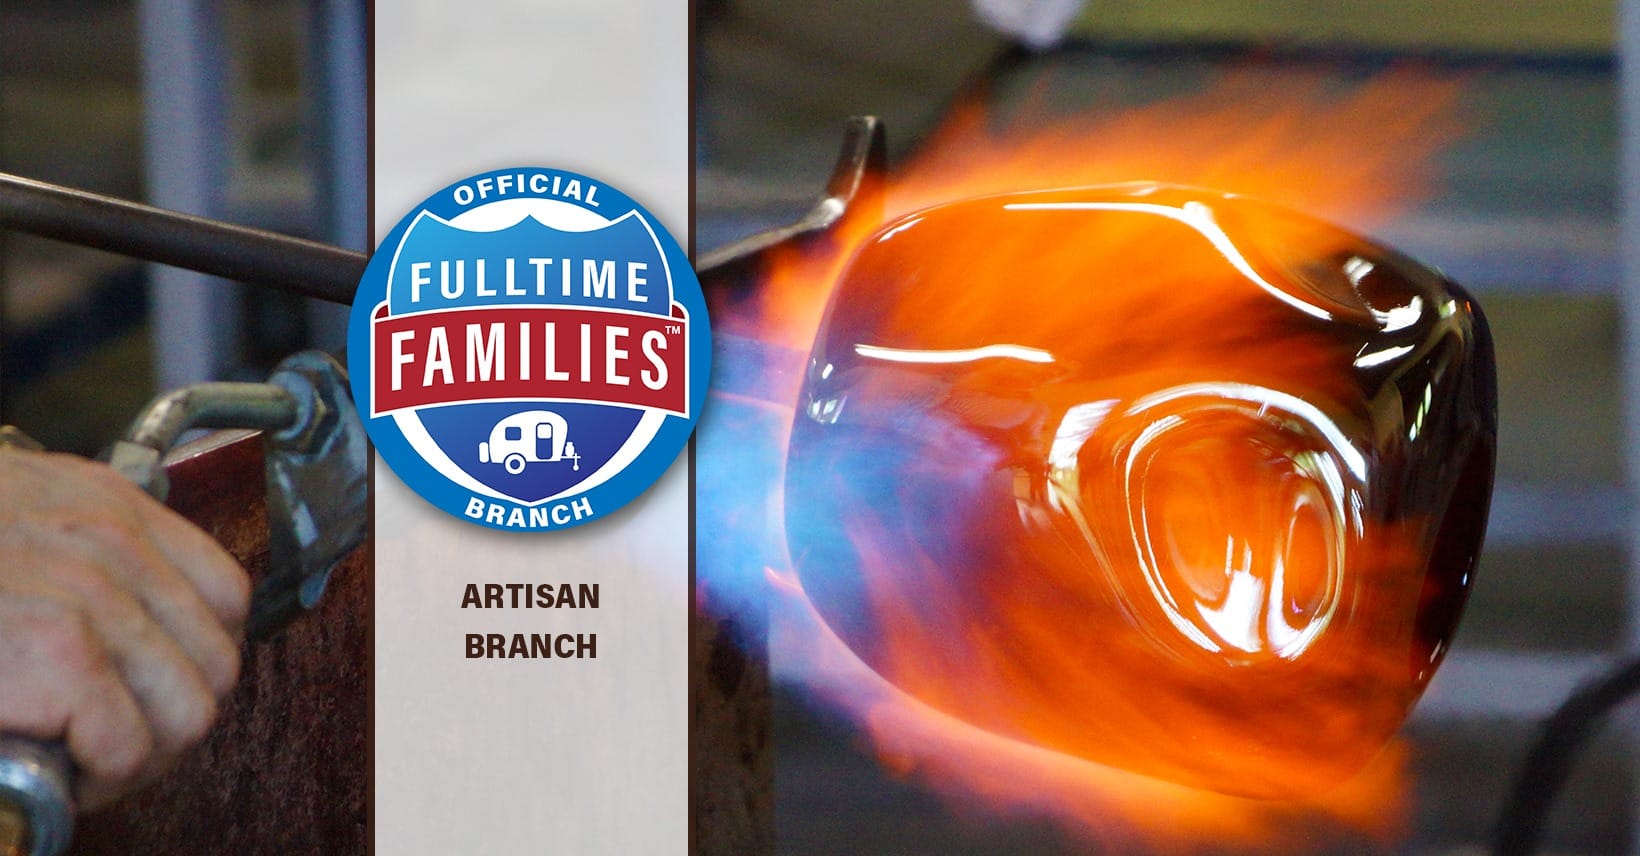 Fulltime Families Branches - Fulltime Families